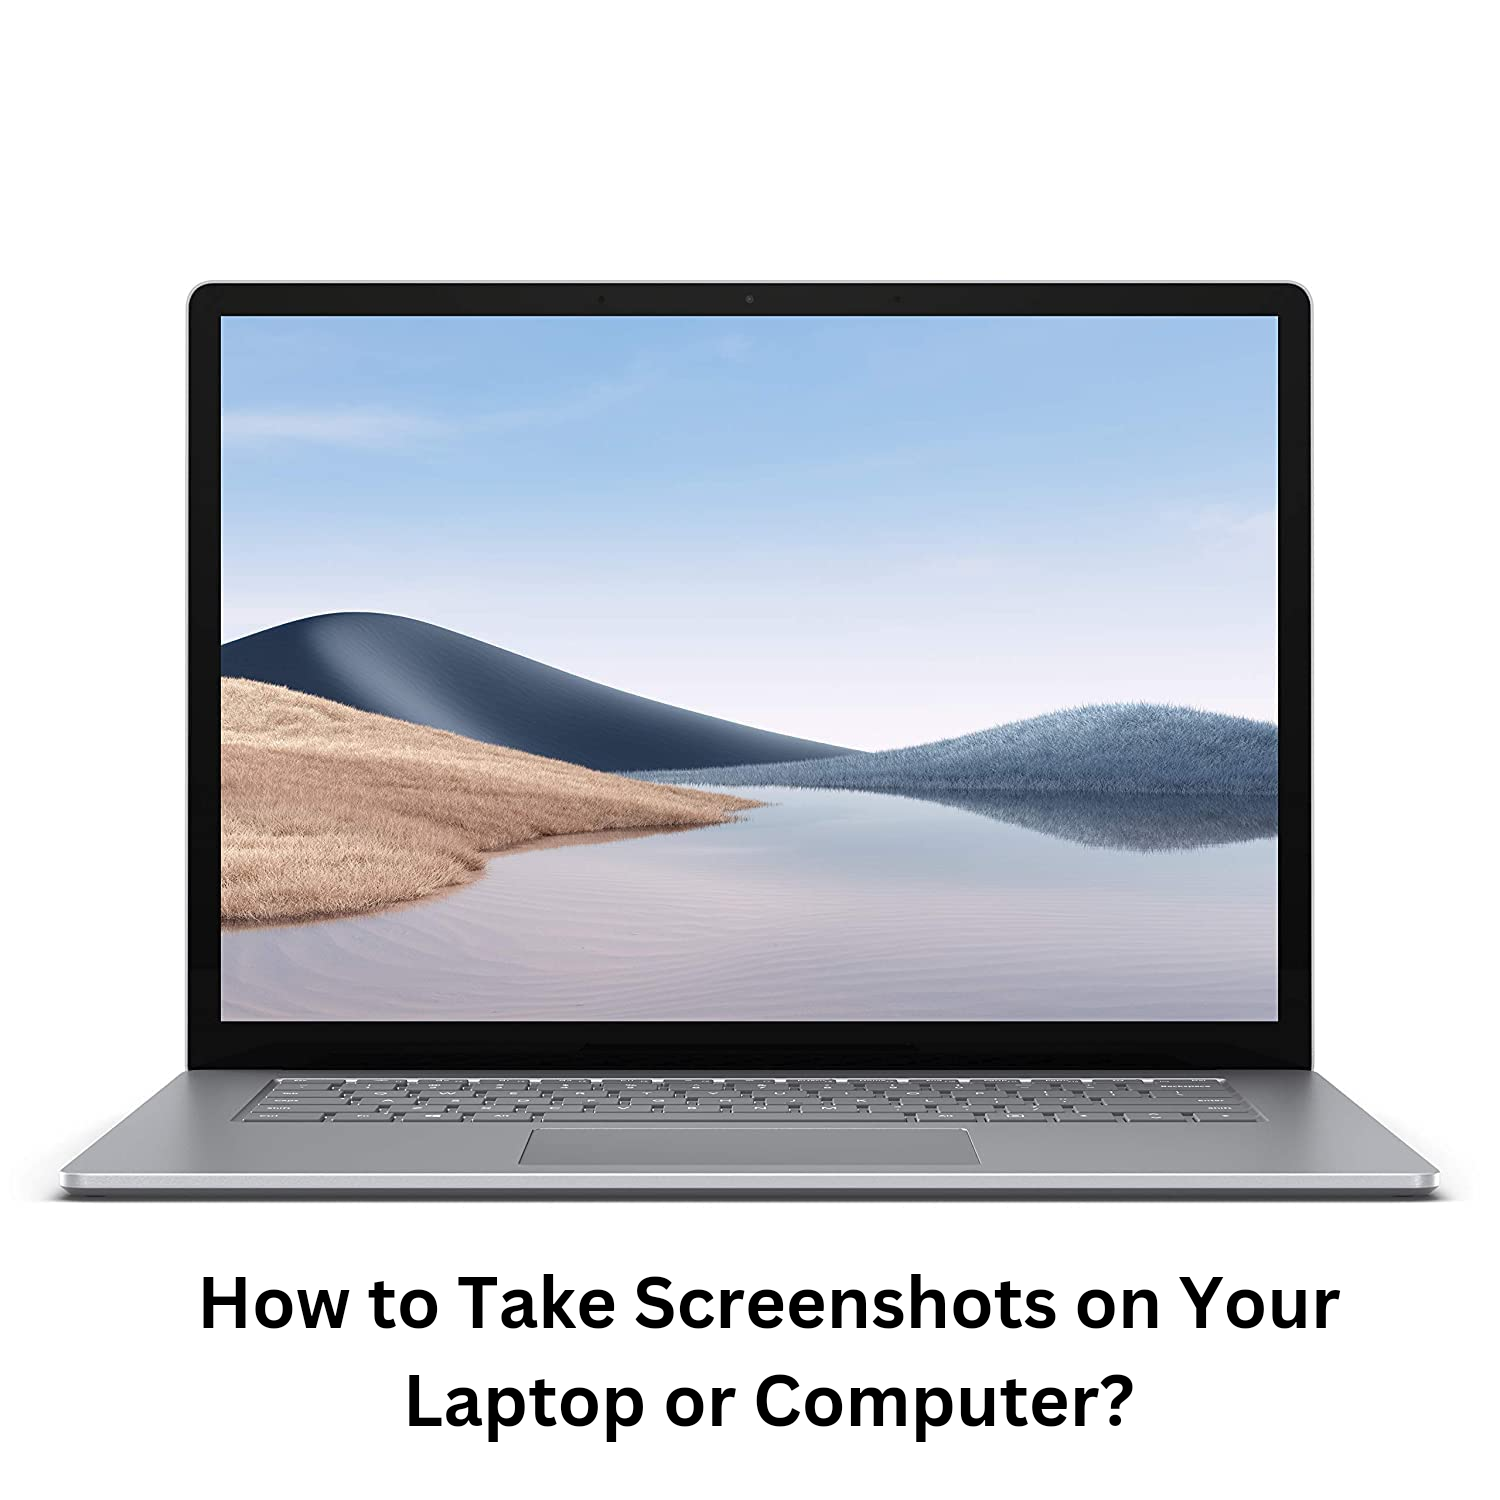 How to Take Screenshots on Your Laptop or Computer?